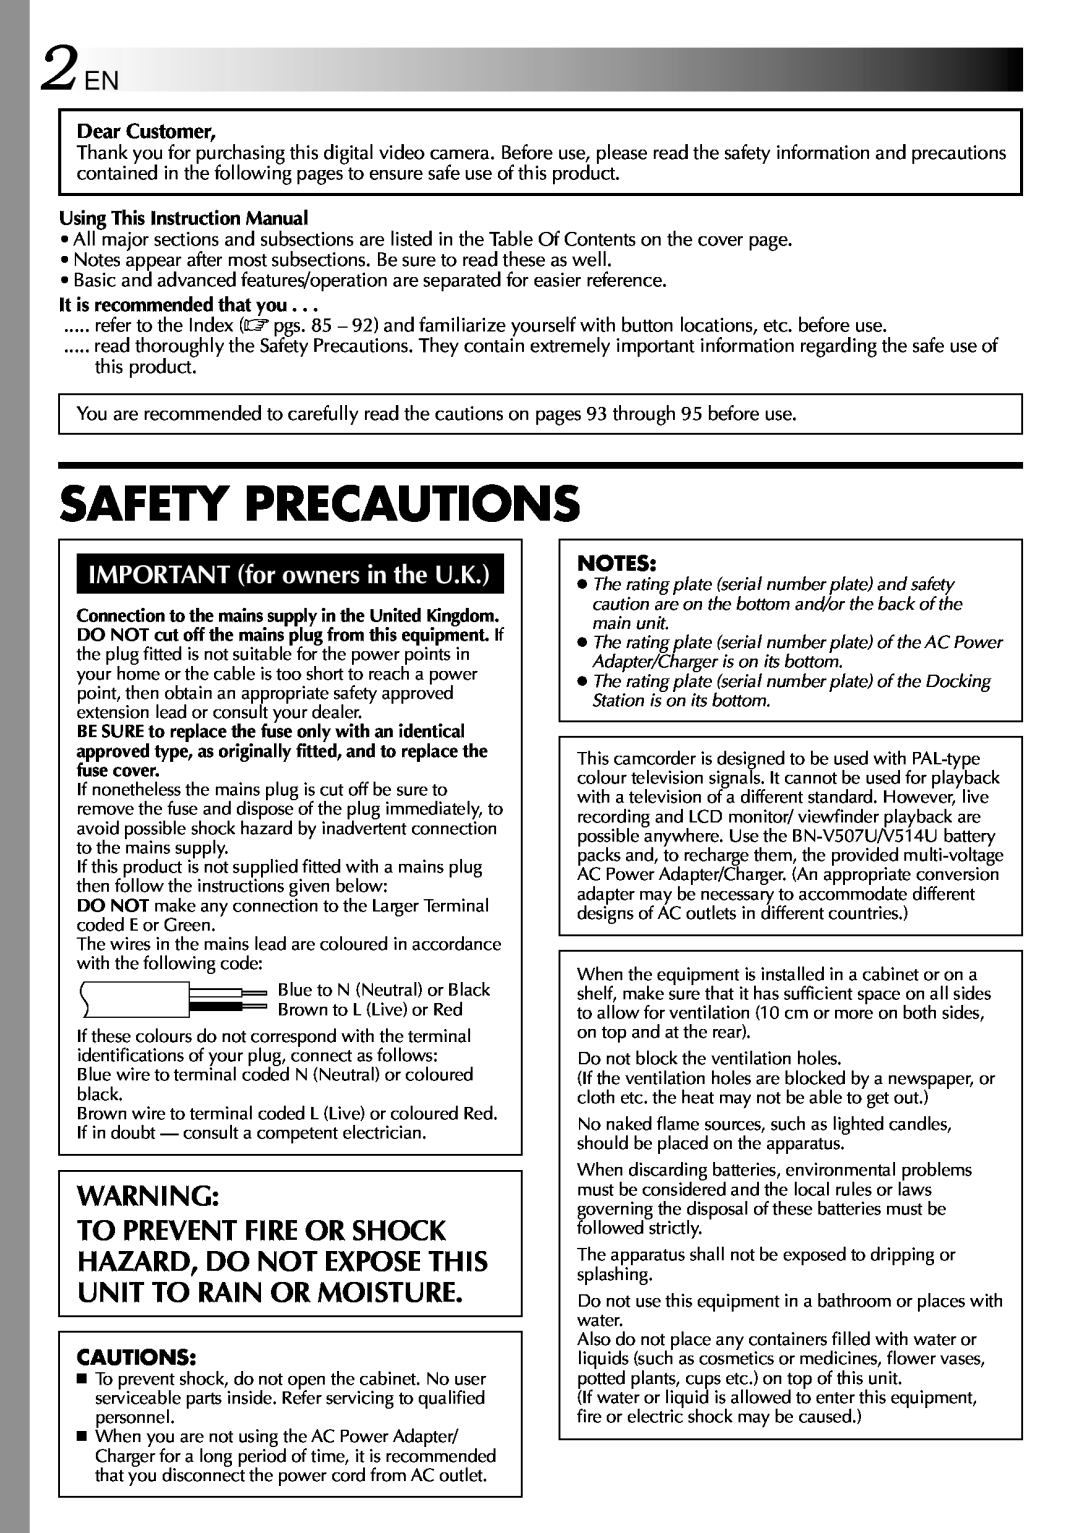 JVC GR-DVX10 specifications 2 EN, Safety Precautions, IMPORTANT for owners in the U.K, Using This Instruction Manual 